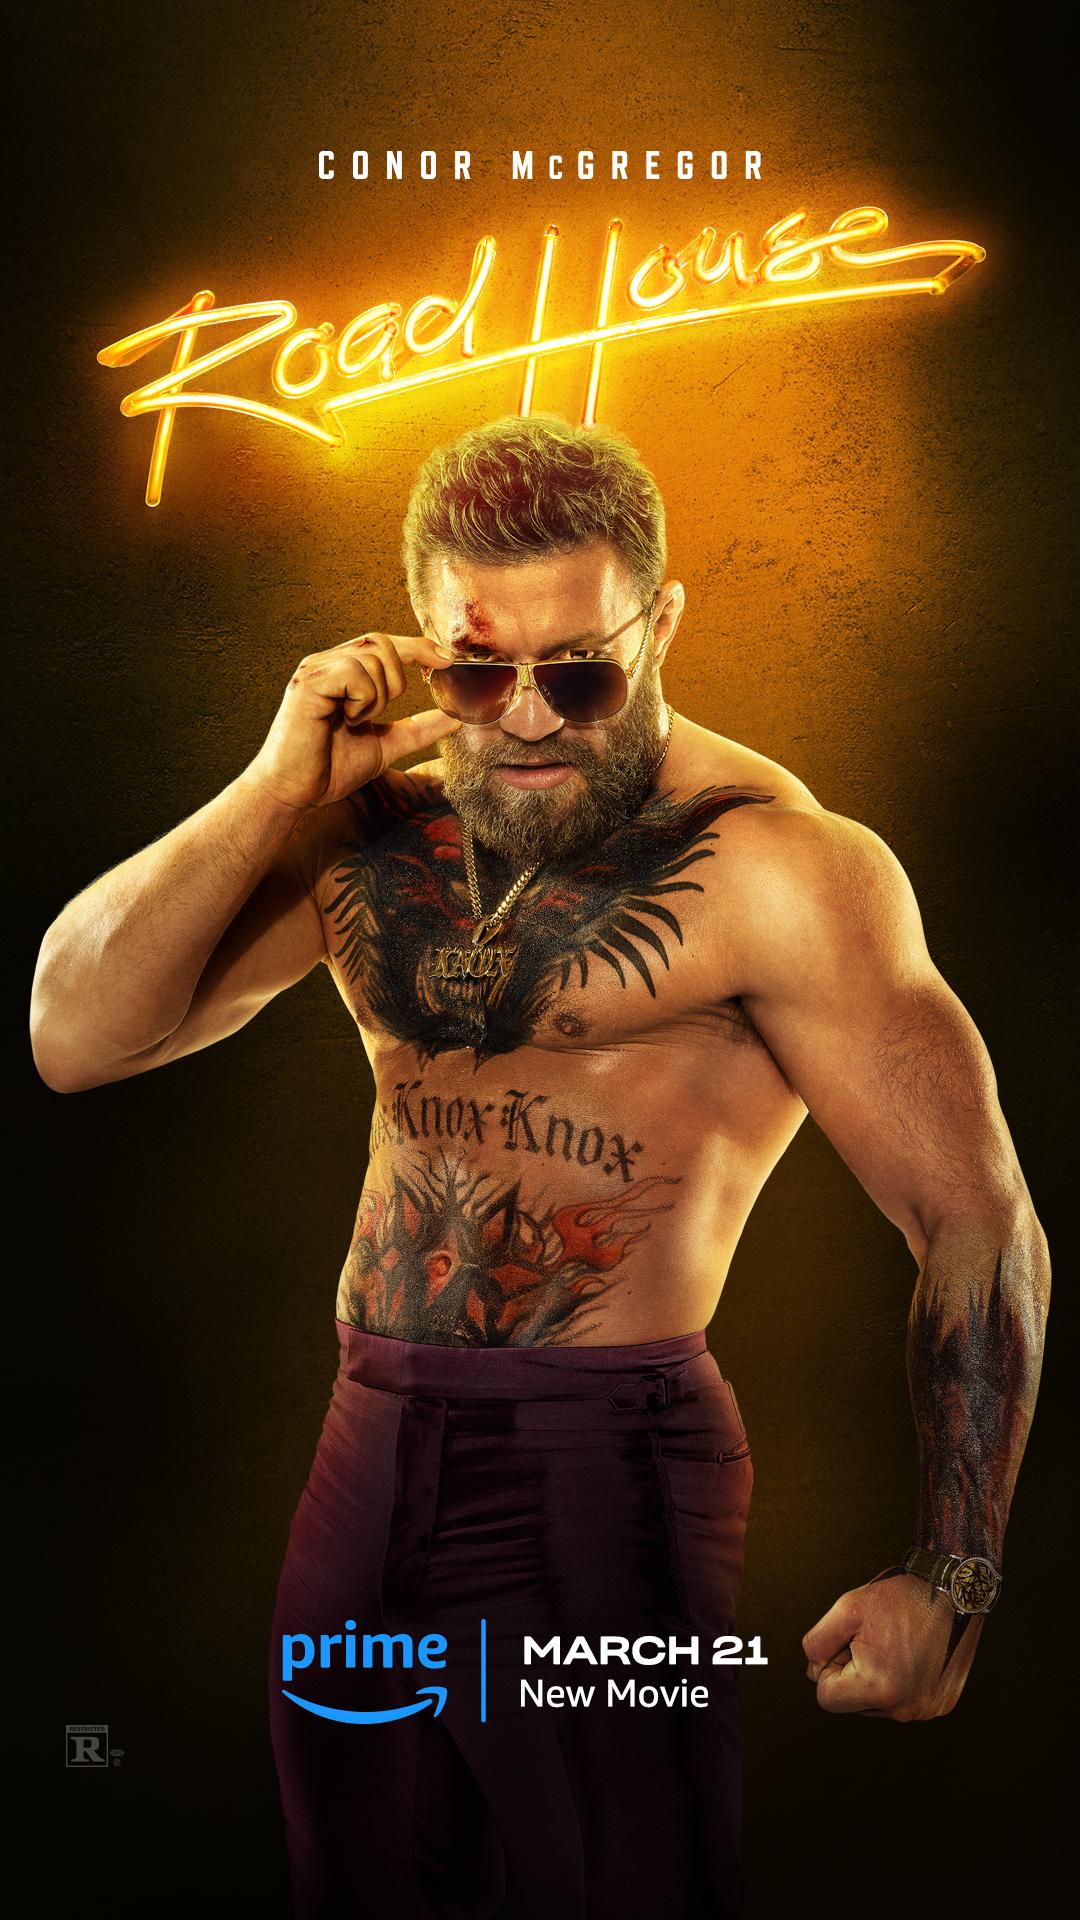 Photo: road house with conor mcgregor